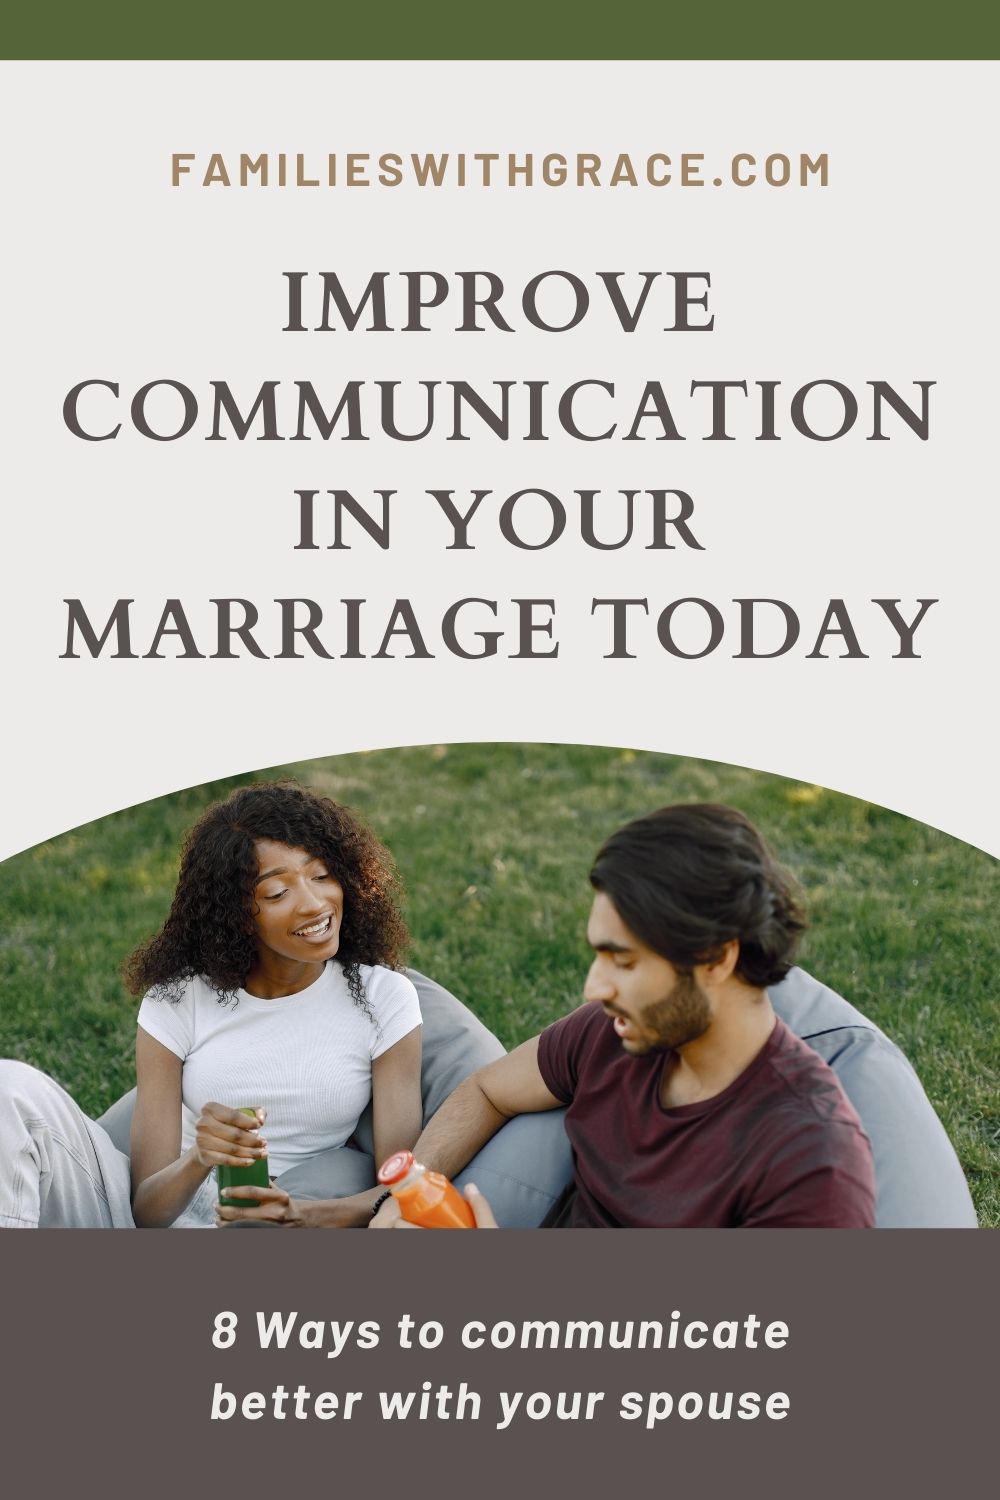 How to improve communication in your marriage